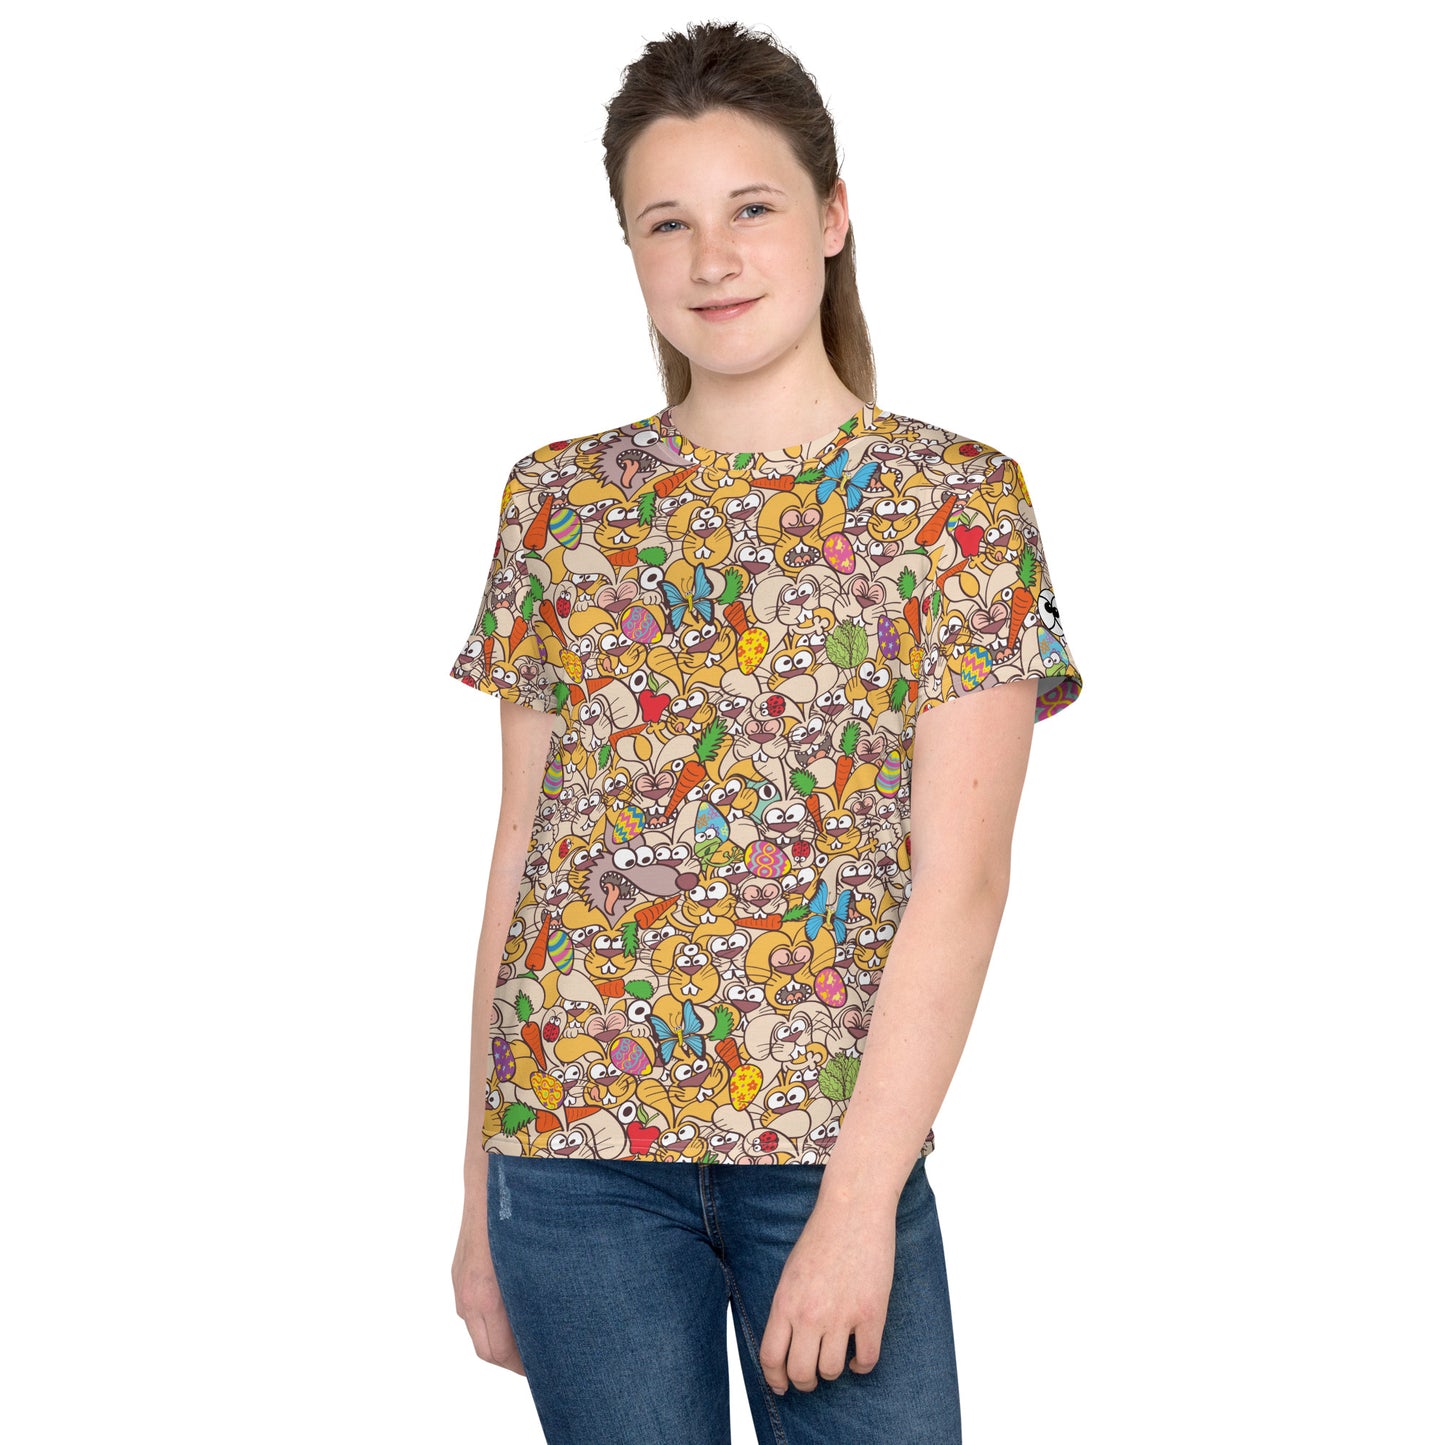 Teen girl wearing Youth crew neck t-shirt all-over printed with Thousands of crazy bunnies celebrating Easter